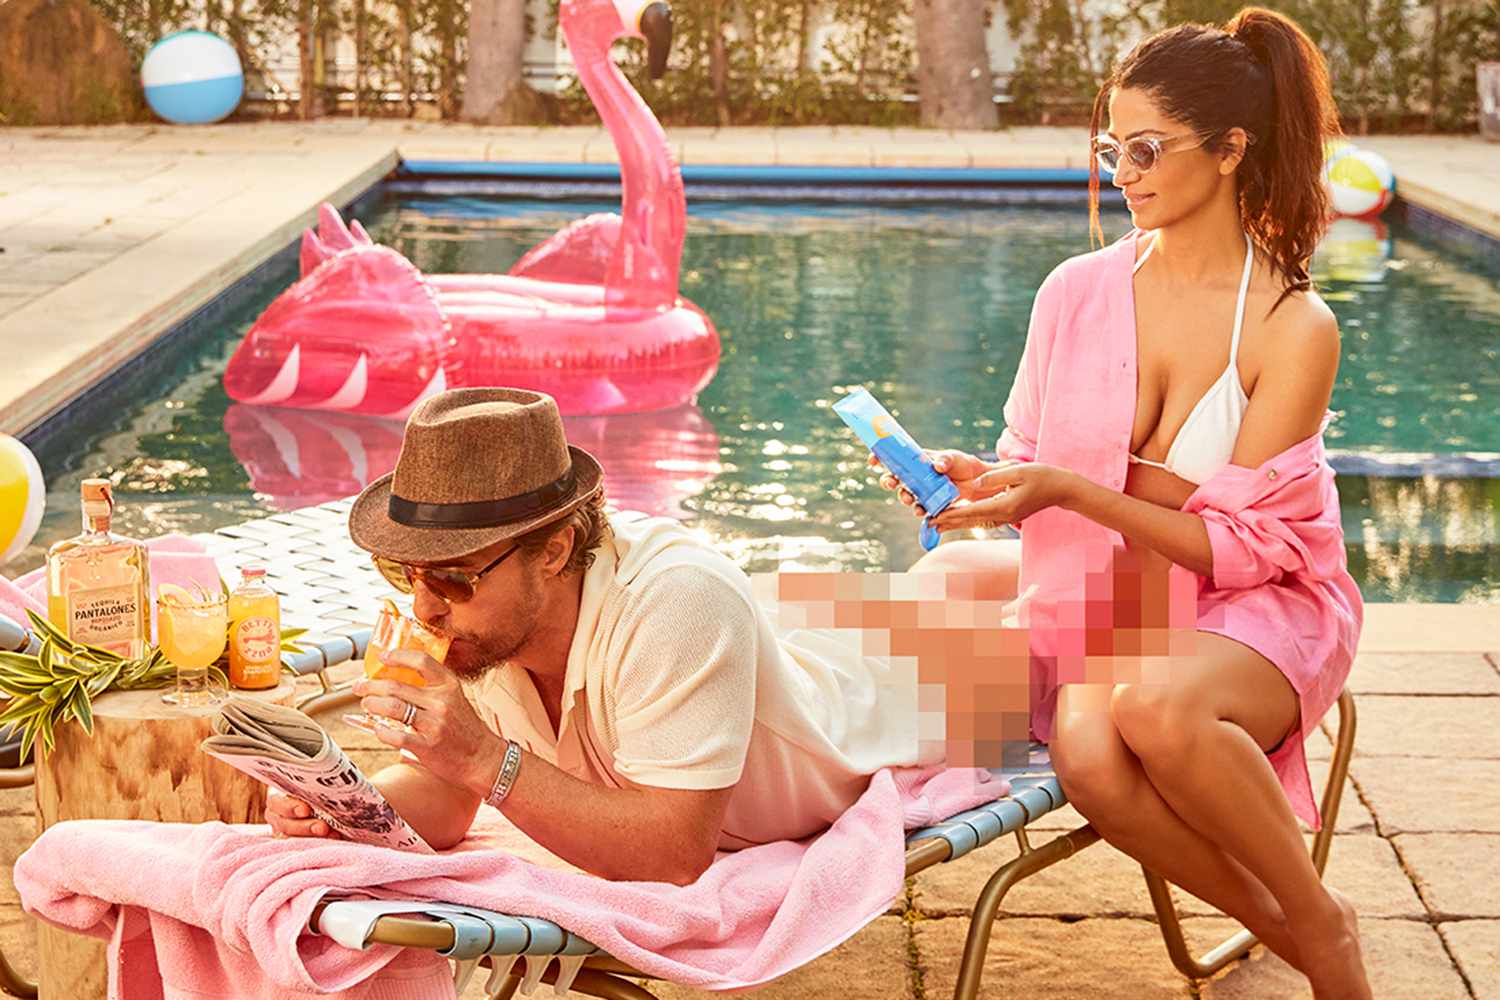 Camila and Matthew McConaughey Go Pantless by the Pool in New Photo: 'Burnt Buns Are No Fun'